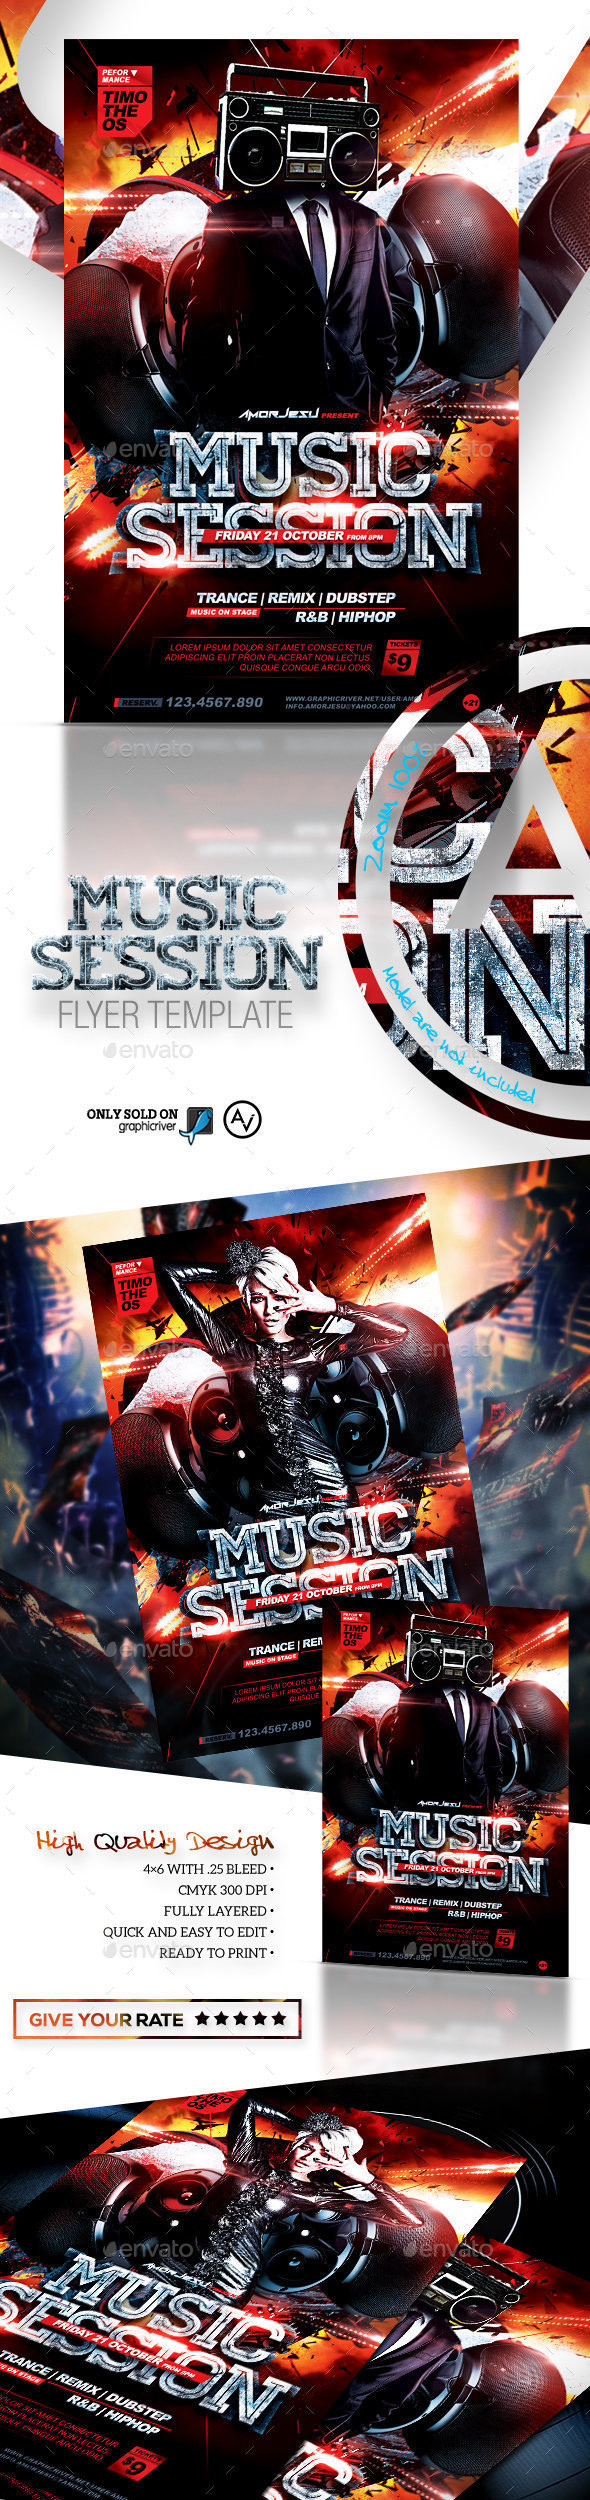 Preview 20  20music 20session 20flyer 20template 20 design 20by 20amorjesu 